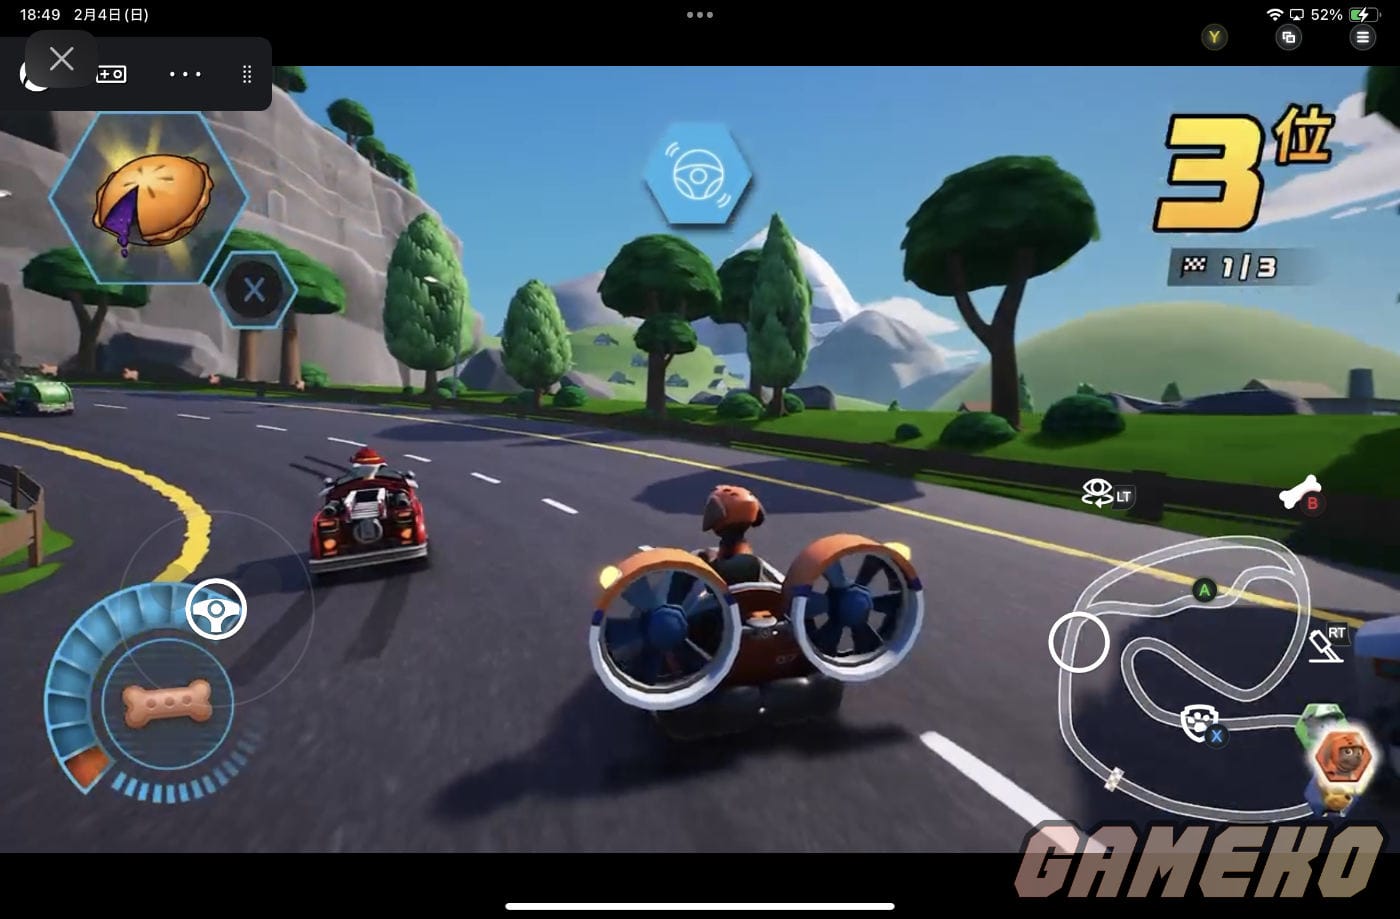 Gamepass cloudgaming ipad only 5